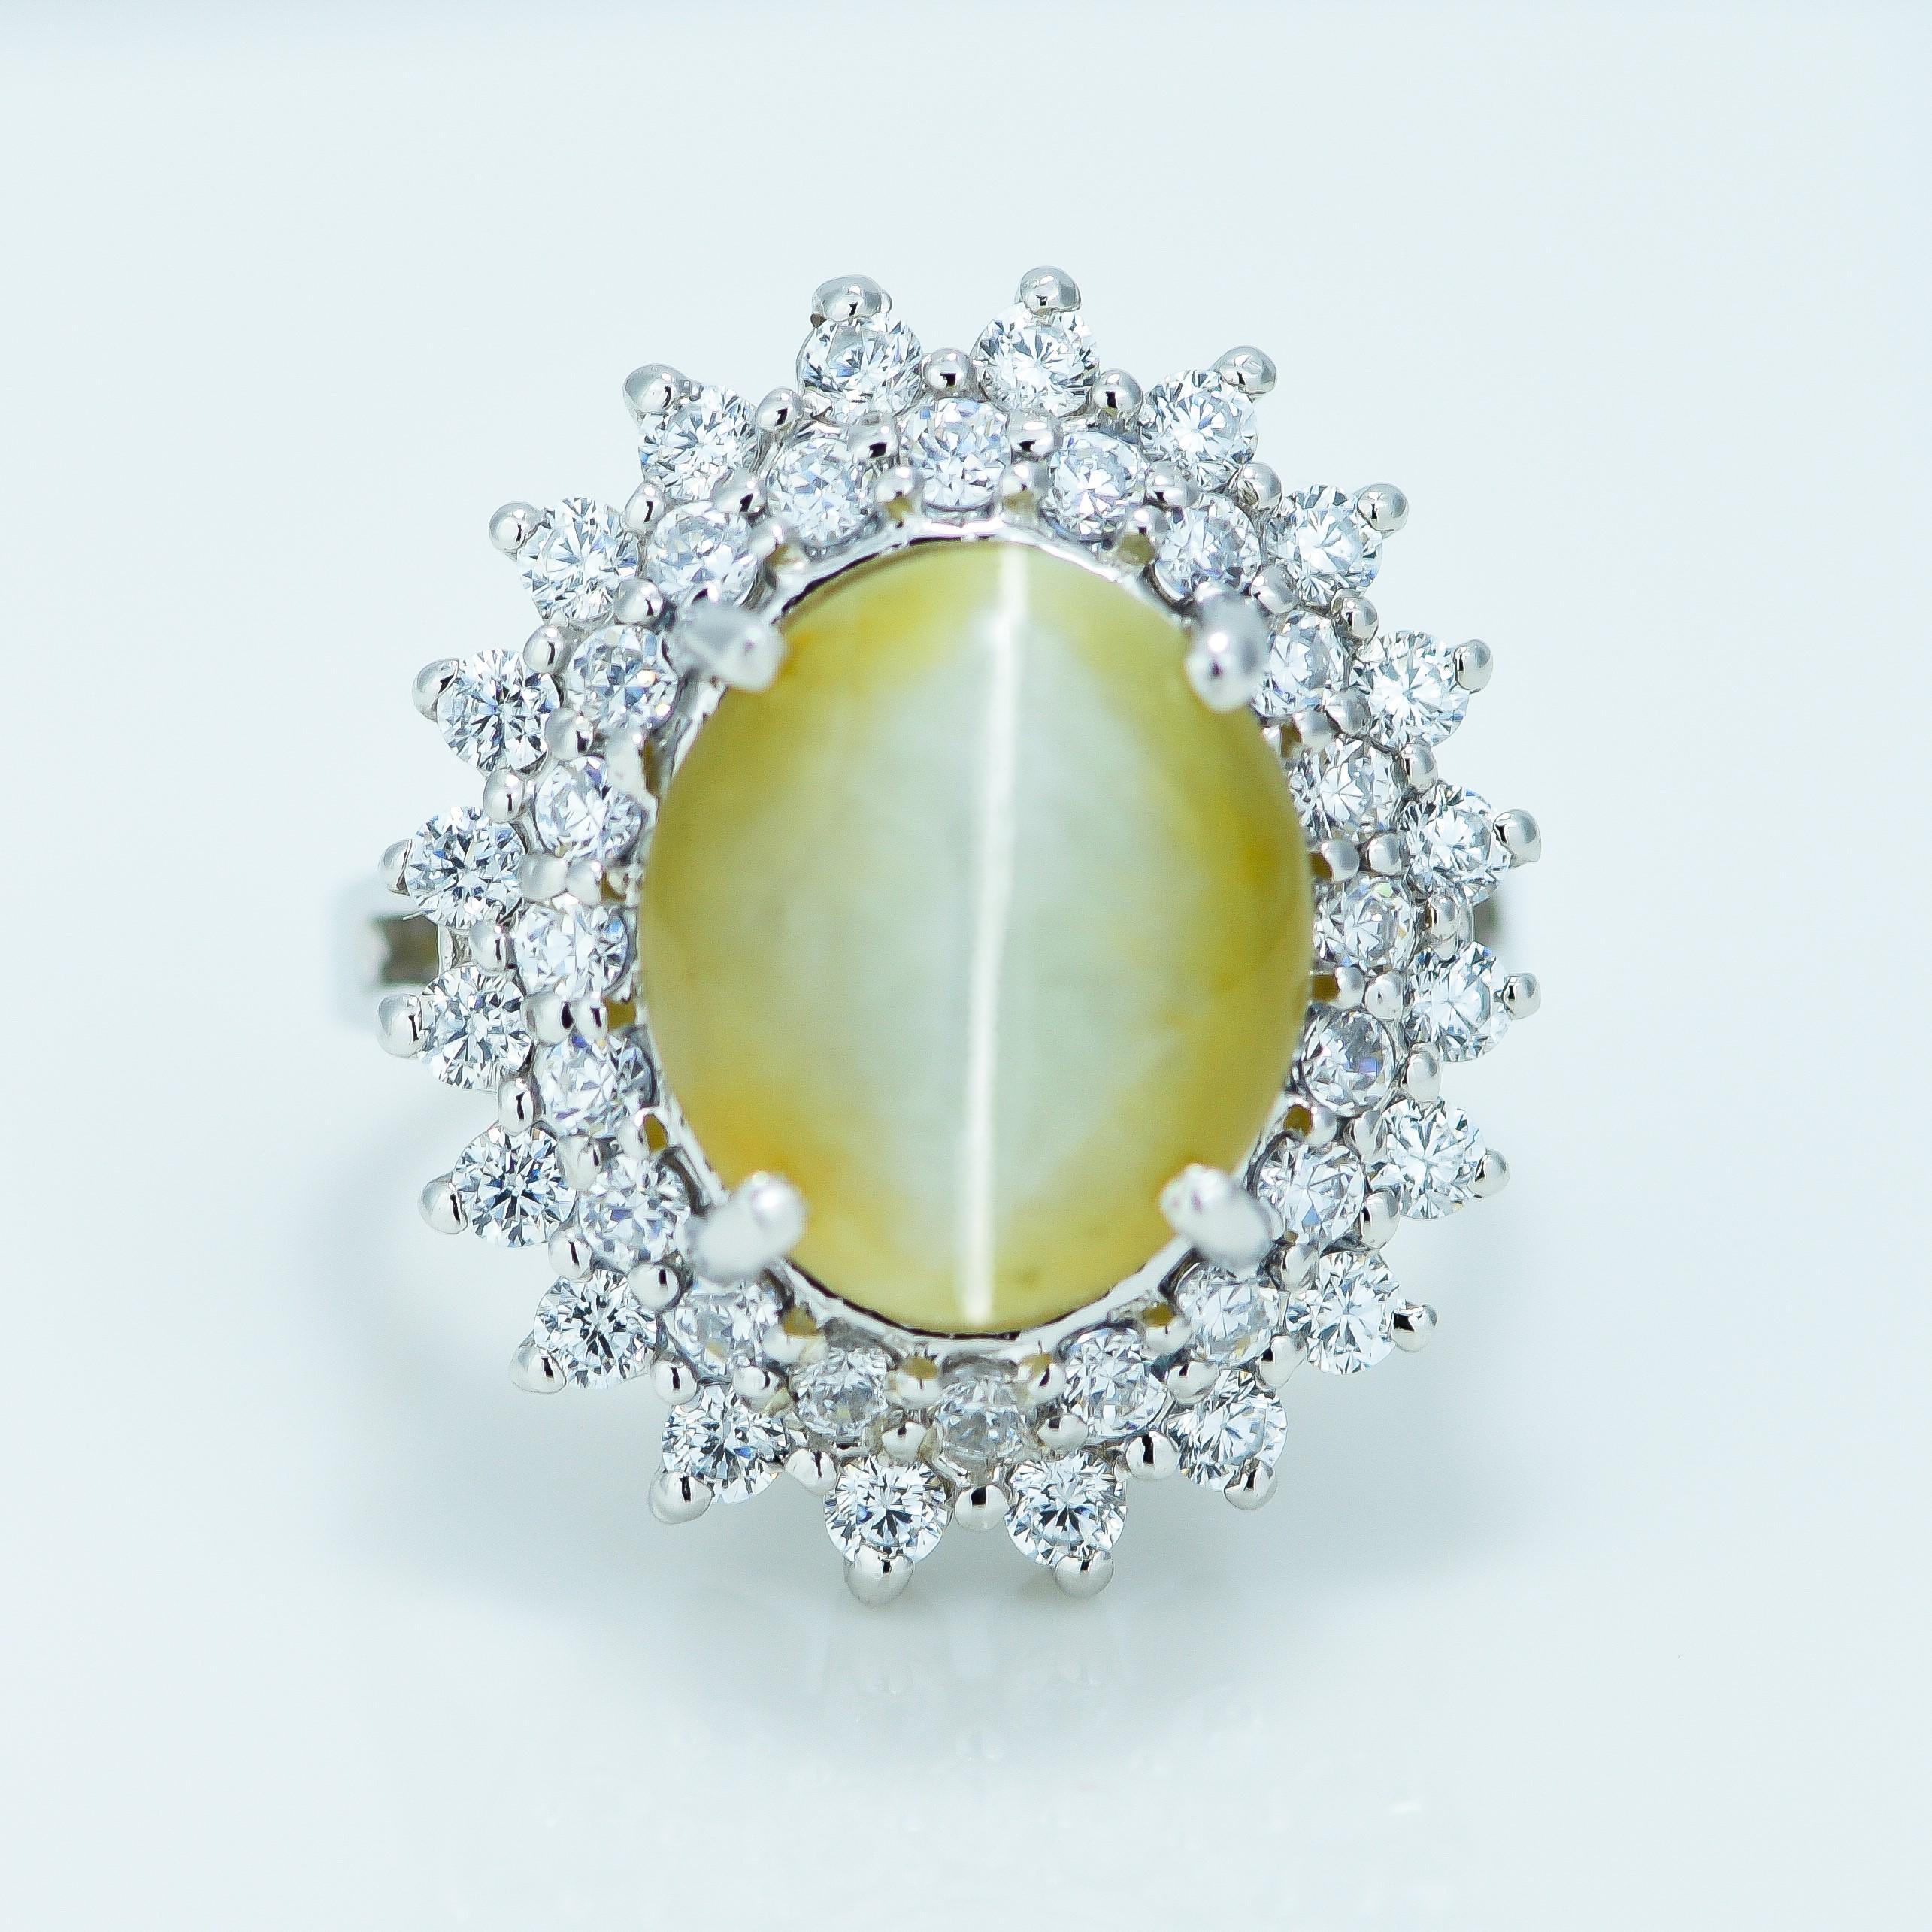 A beautifully designed Natural Emerald silver ring, 

Specifications 

Ring metal - 925 Silver
Ring Size - 6 US

Centre stone type - Natural Cats Eye
Centre stone size - 11.5 X 10.10 mm (Approx.)
Centre stone weight - 4.12 ct (Approx)


Surrounding